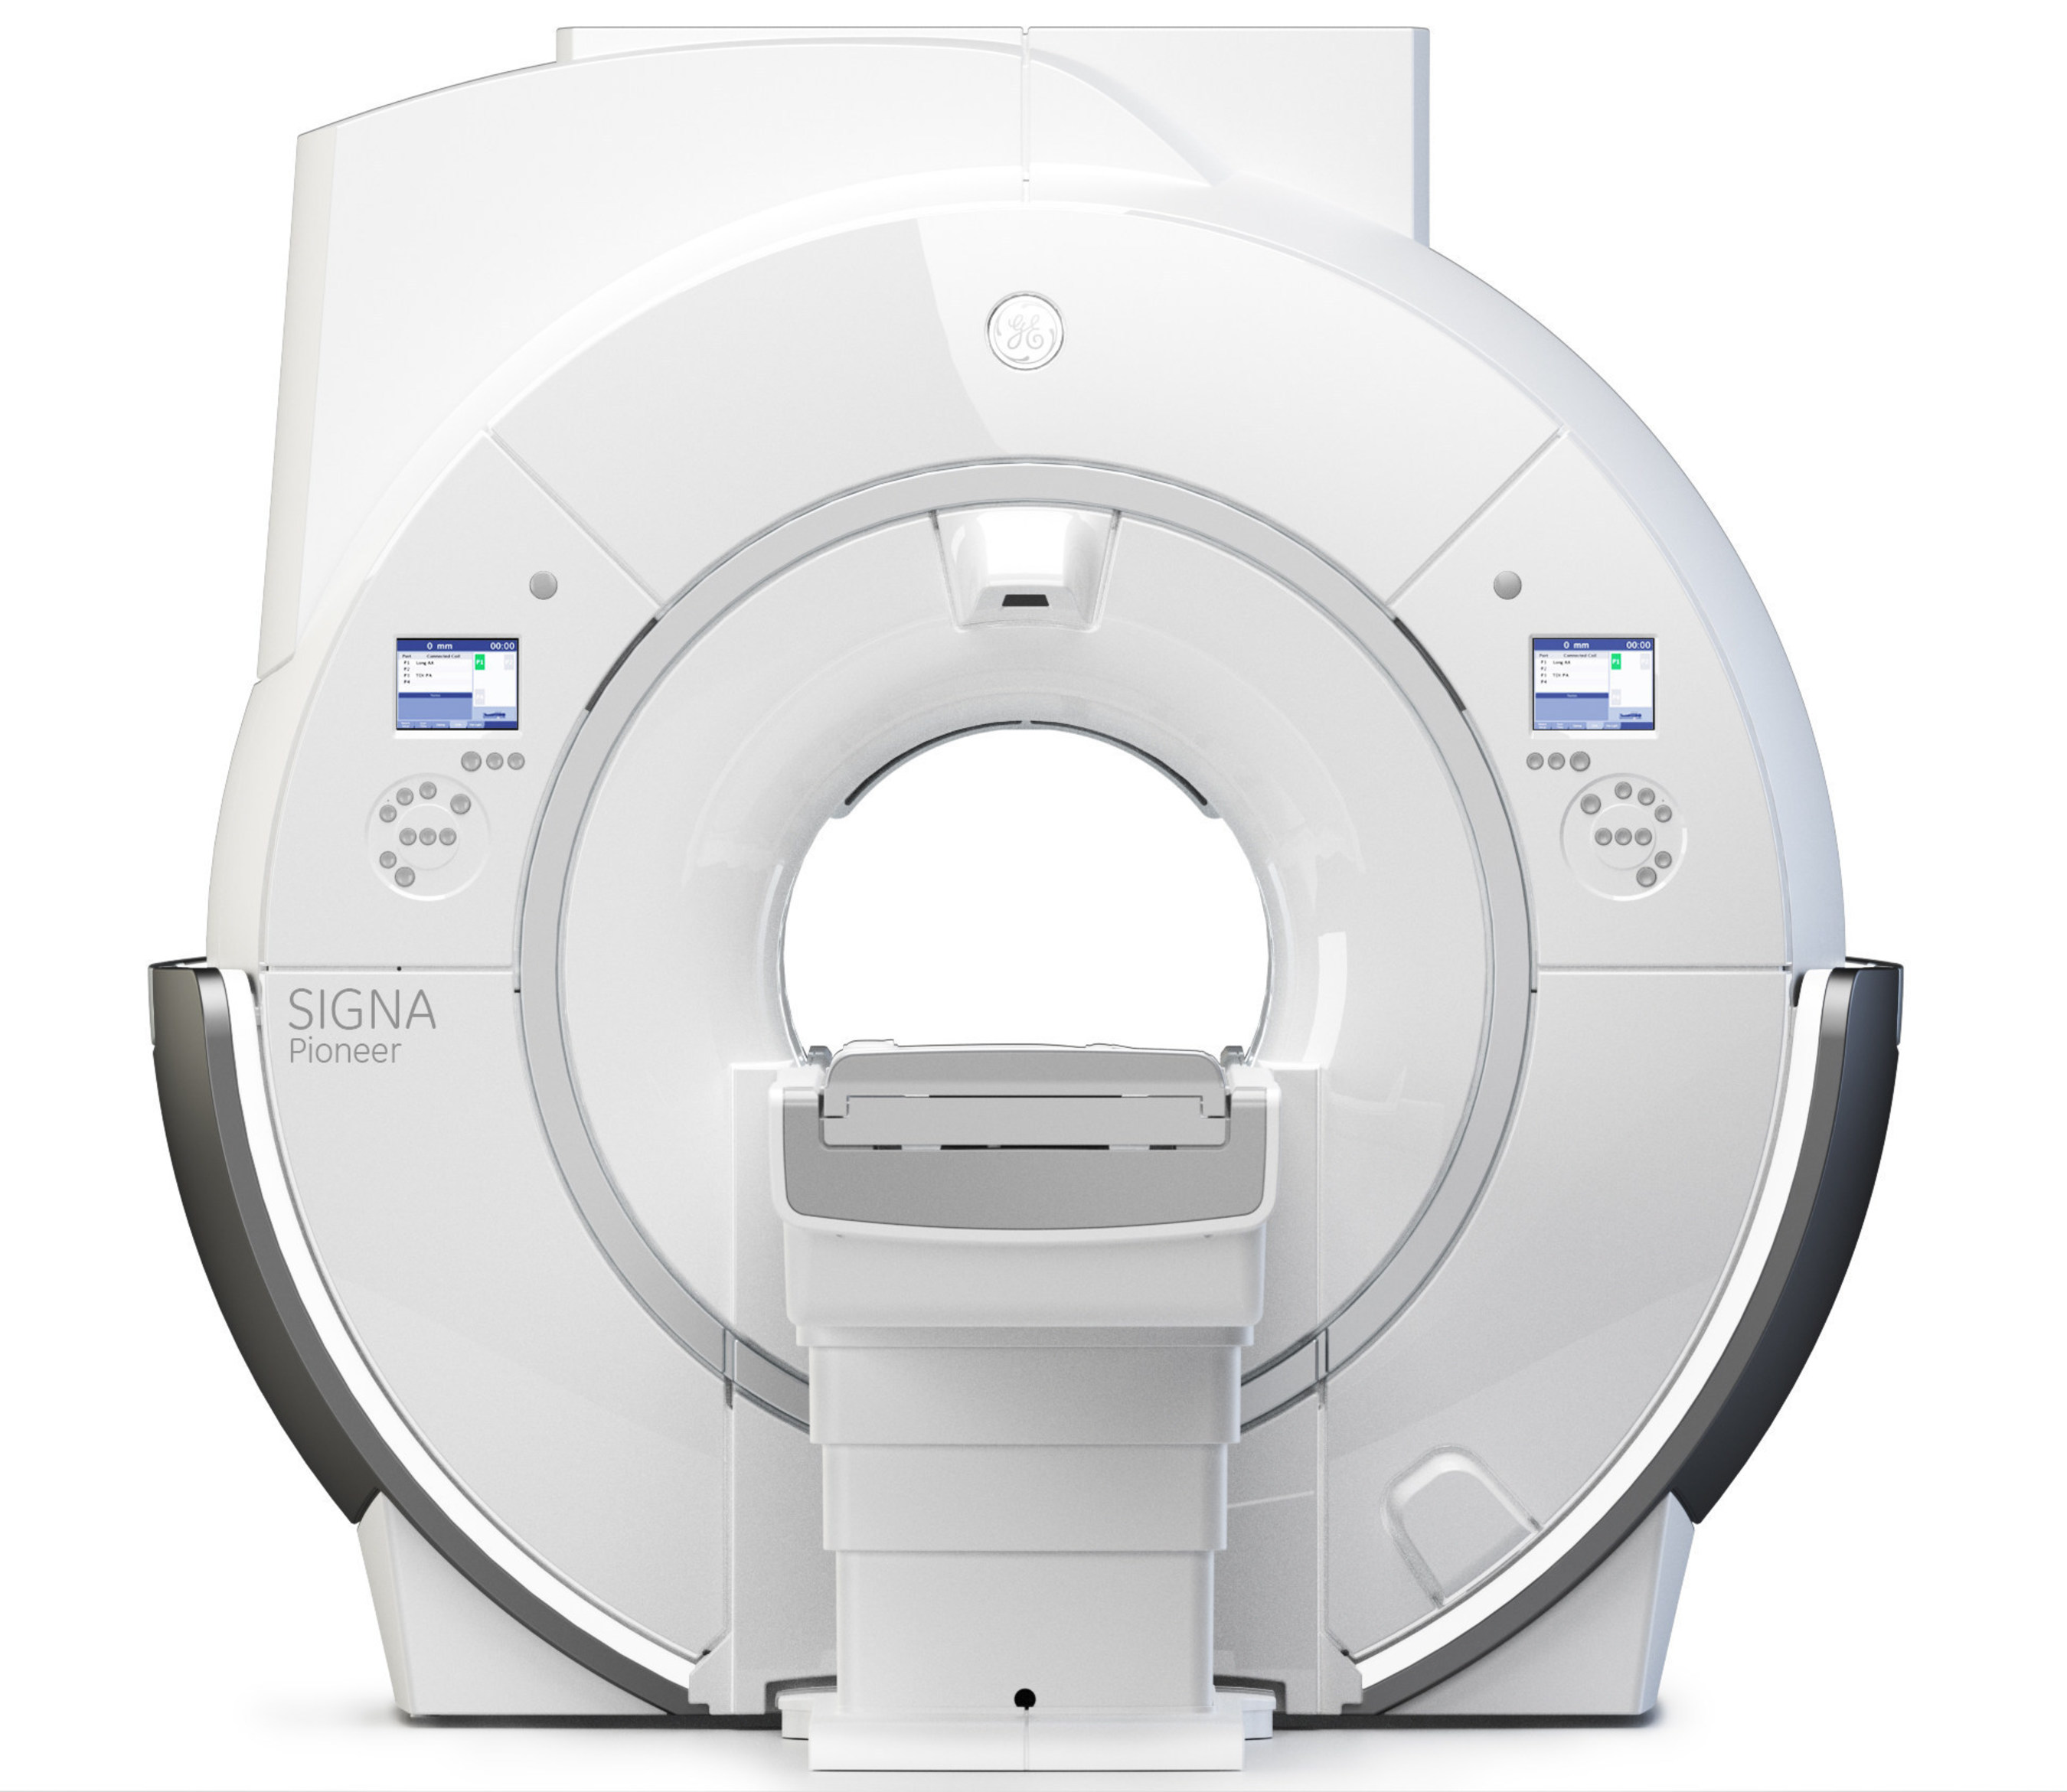 SIGNA Pioneer is a new 510(k) pending 3.0T MRI system with novel productivity enhancements like MAGiC.